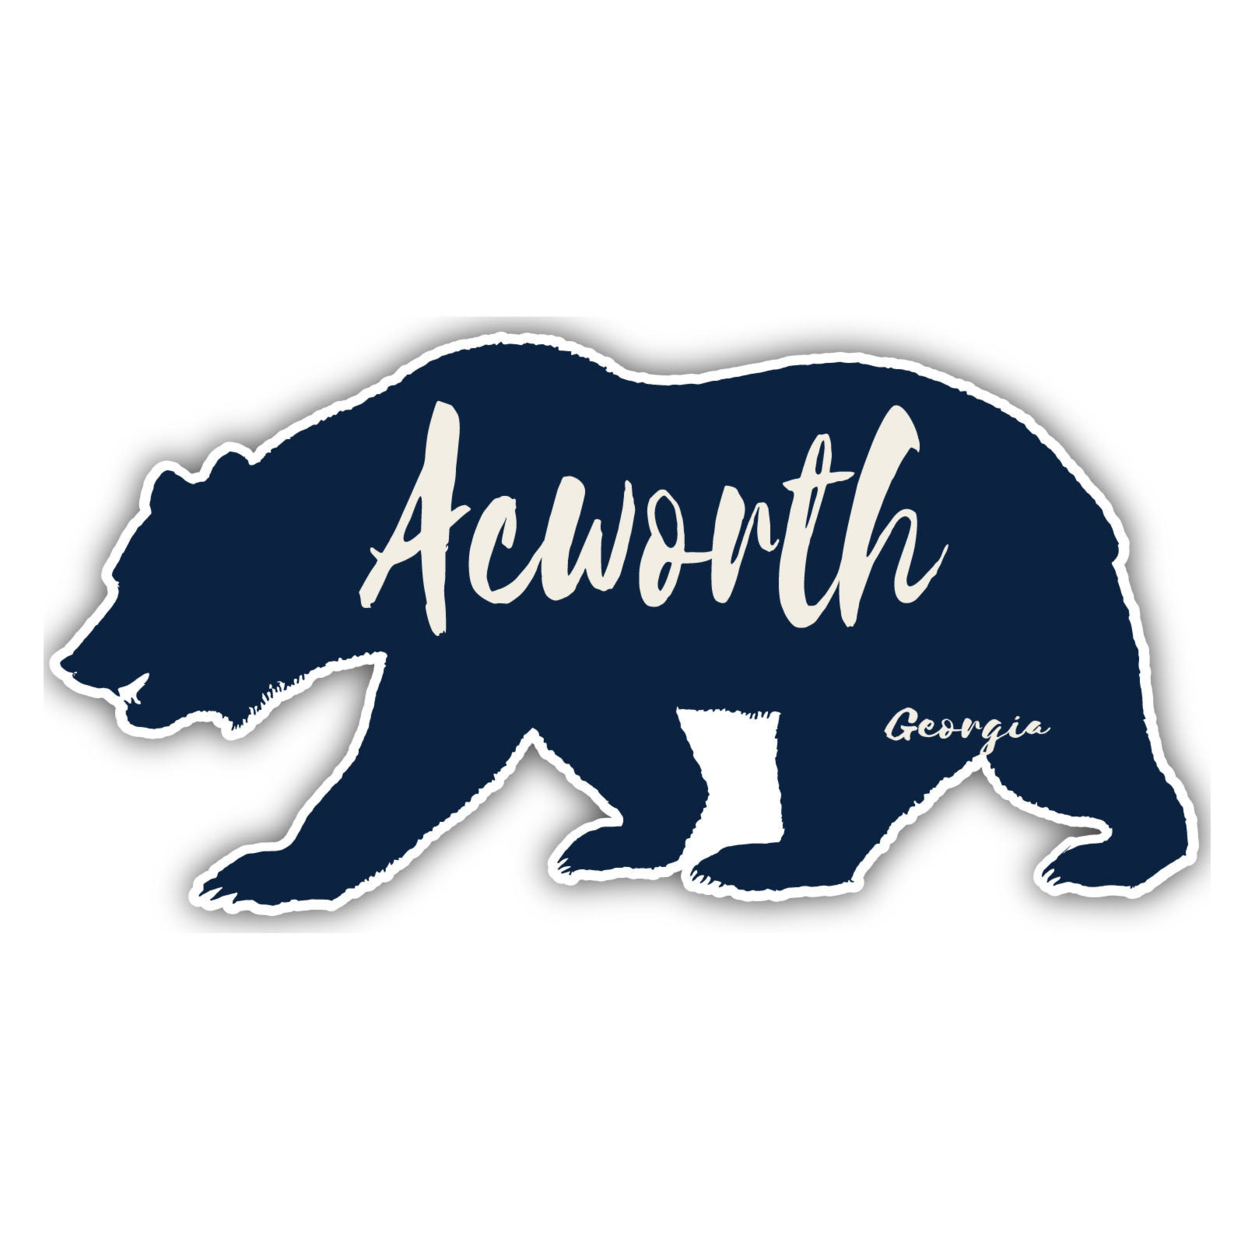 Acworth Georgia Souvenir Decorative Stickers (Choose Theme And Size) - 4-Pack, 10-Inch, Great Outdoors